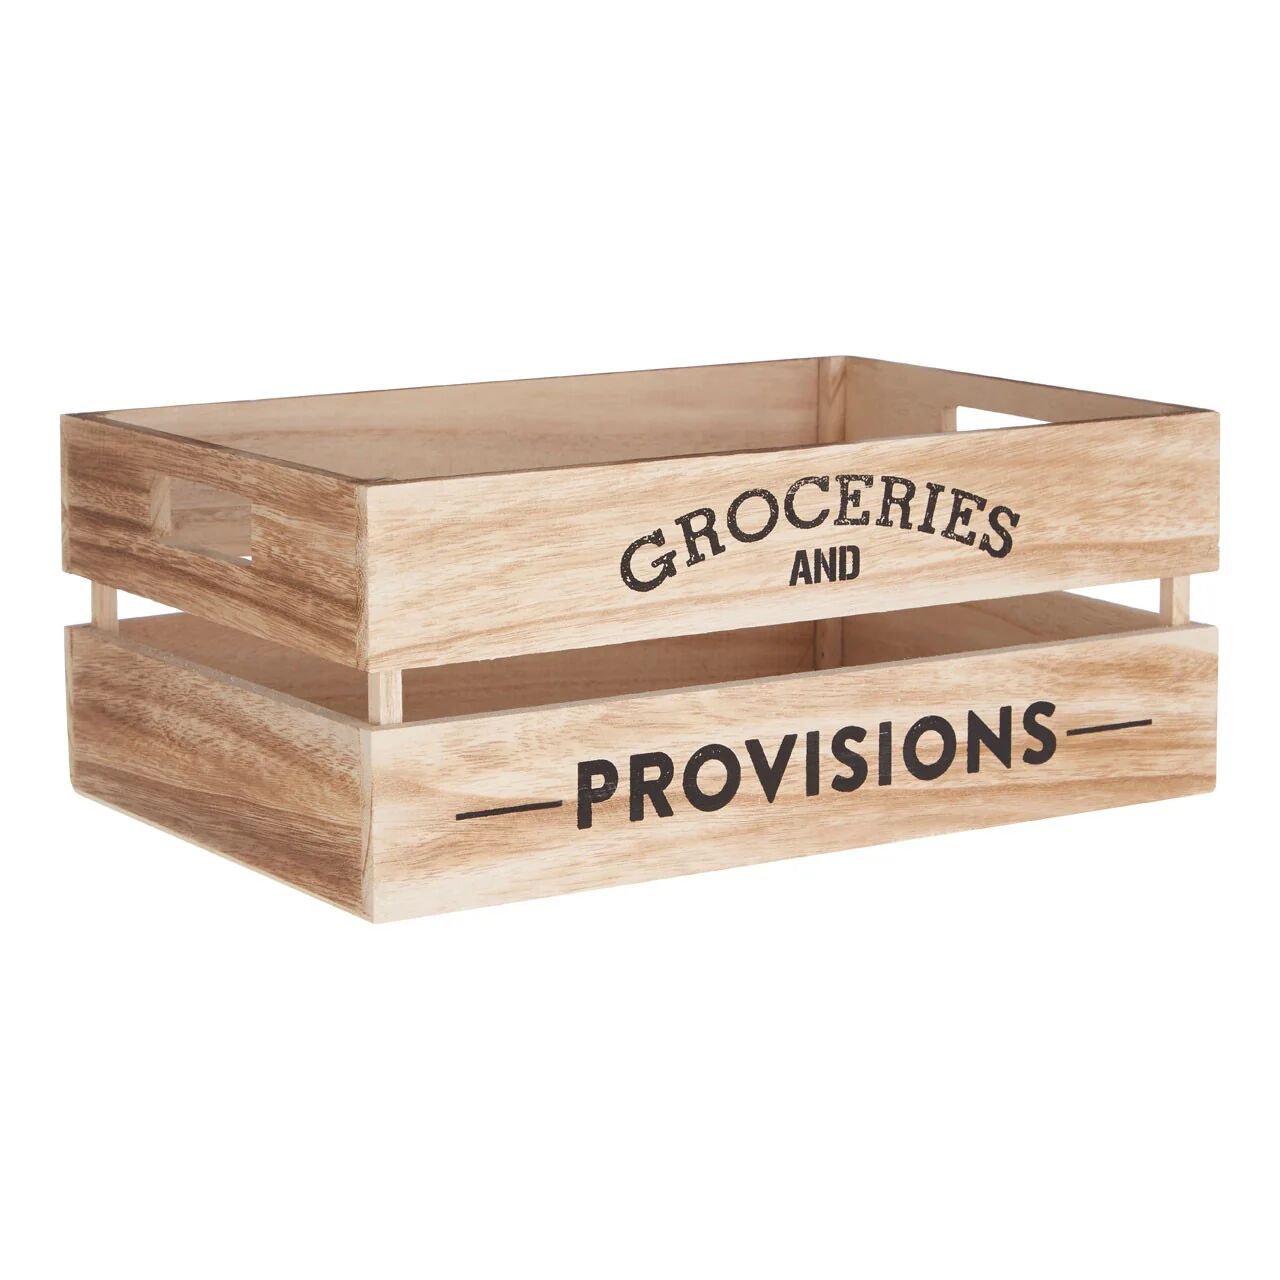 HoF Living Groceries Crate - Groceries & Provisions Natural Crate